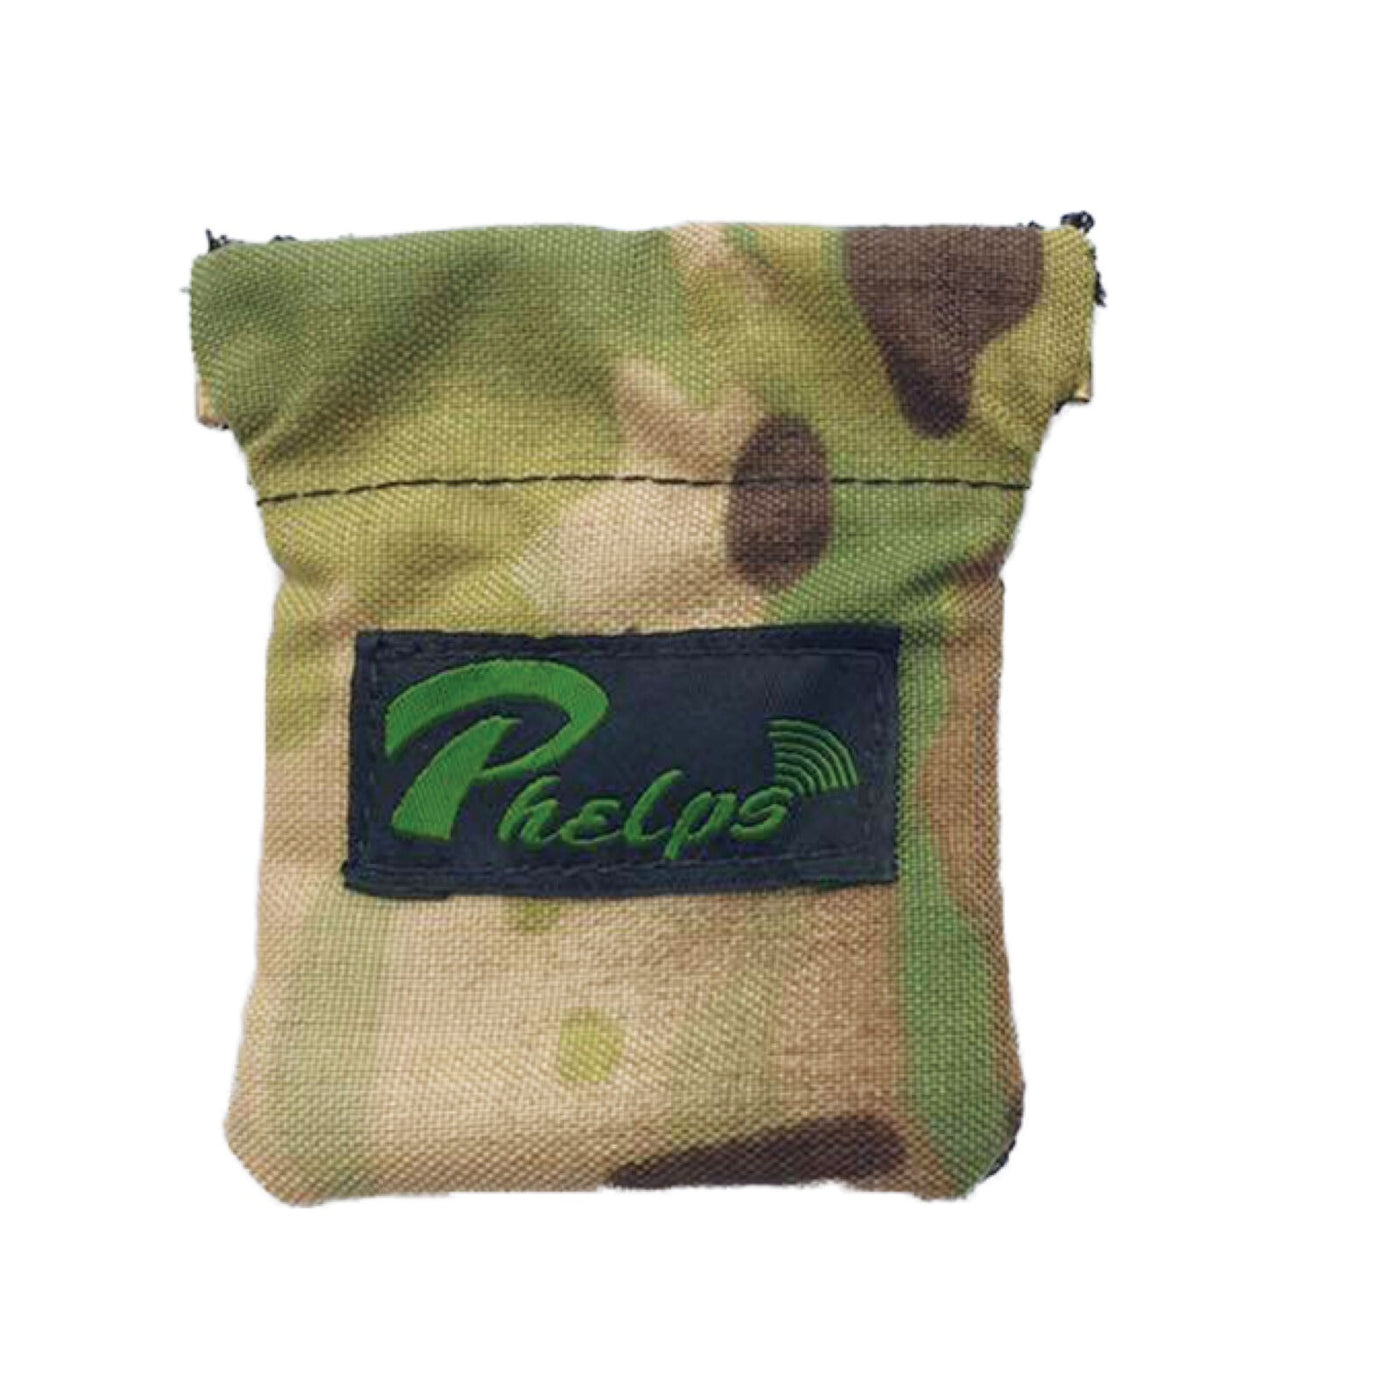 Phelps Diaphragm Call Pouch